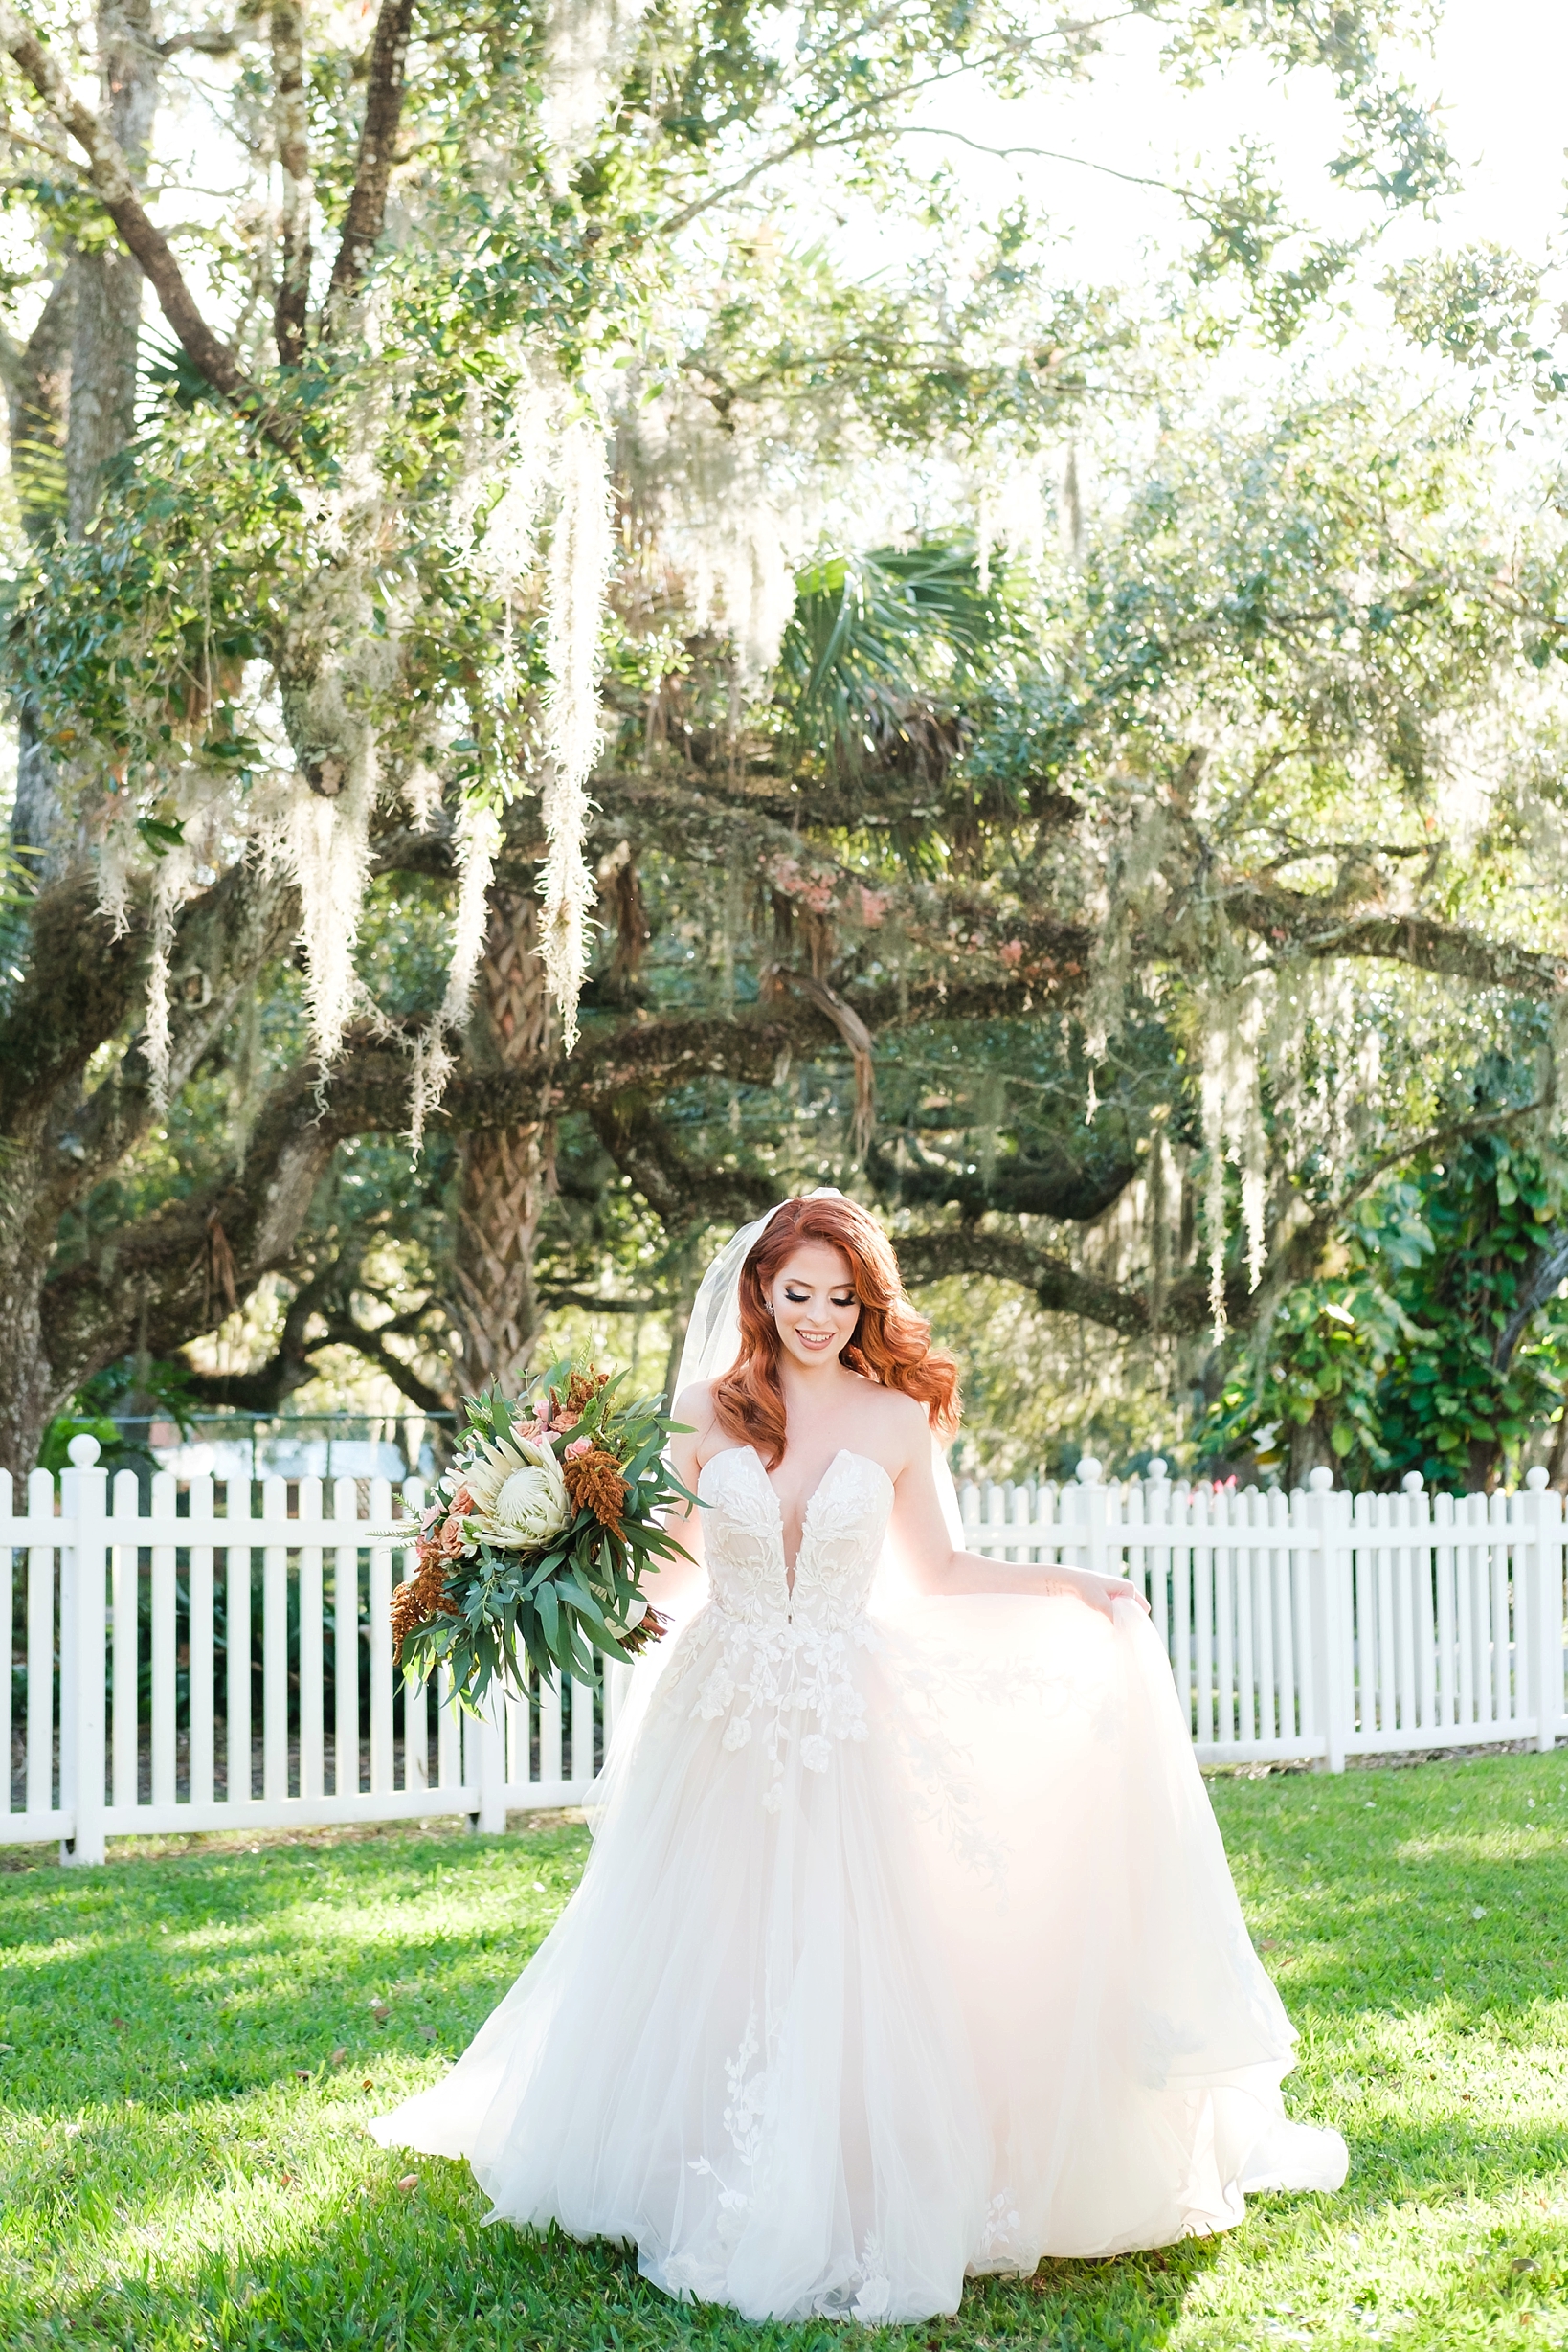 Bride walking in green grass while holding her dress